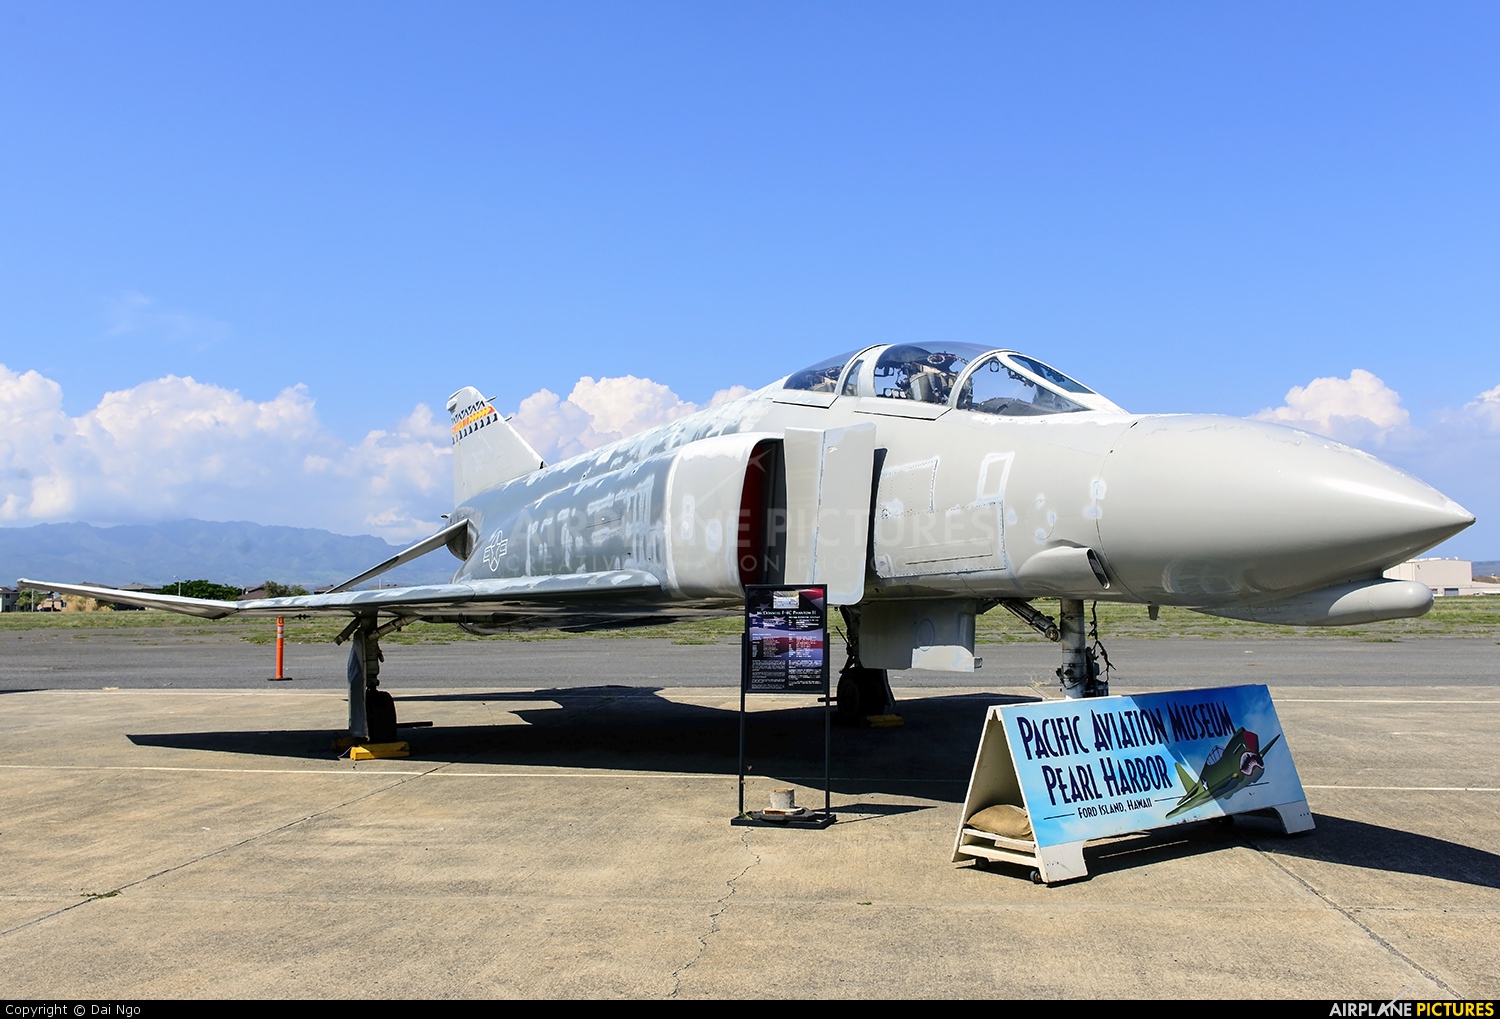 USA - Air Force 64-0792 aircraft at Pacific Aviation Museum - Pearl Harbor